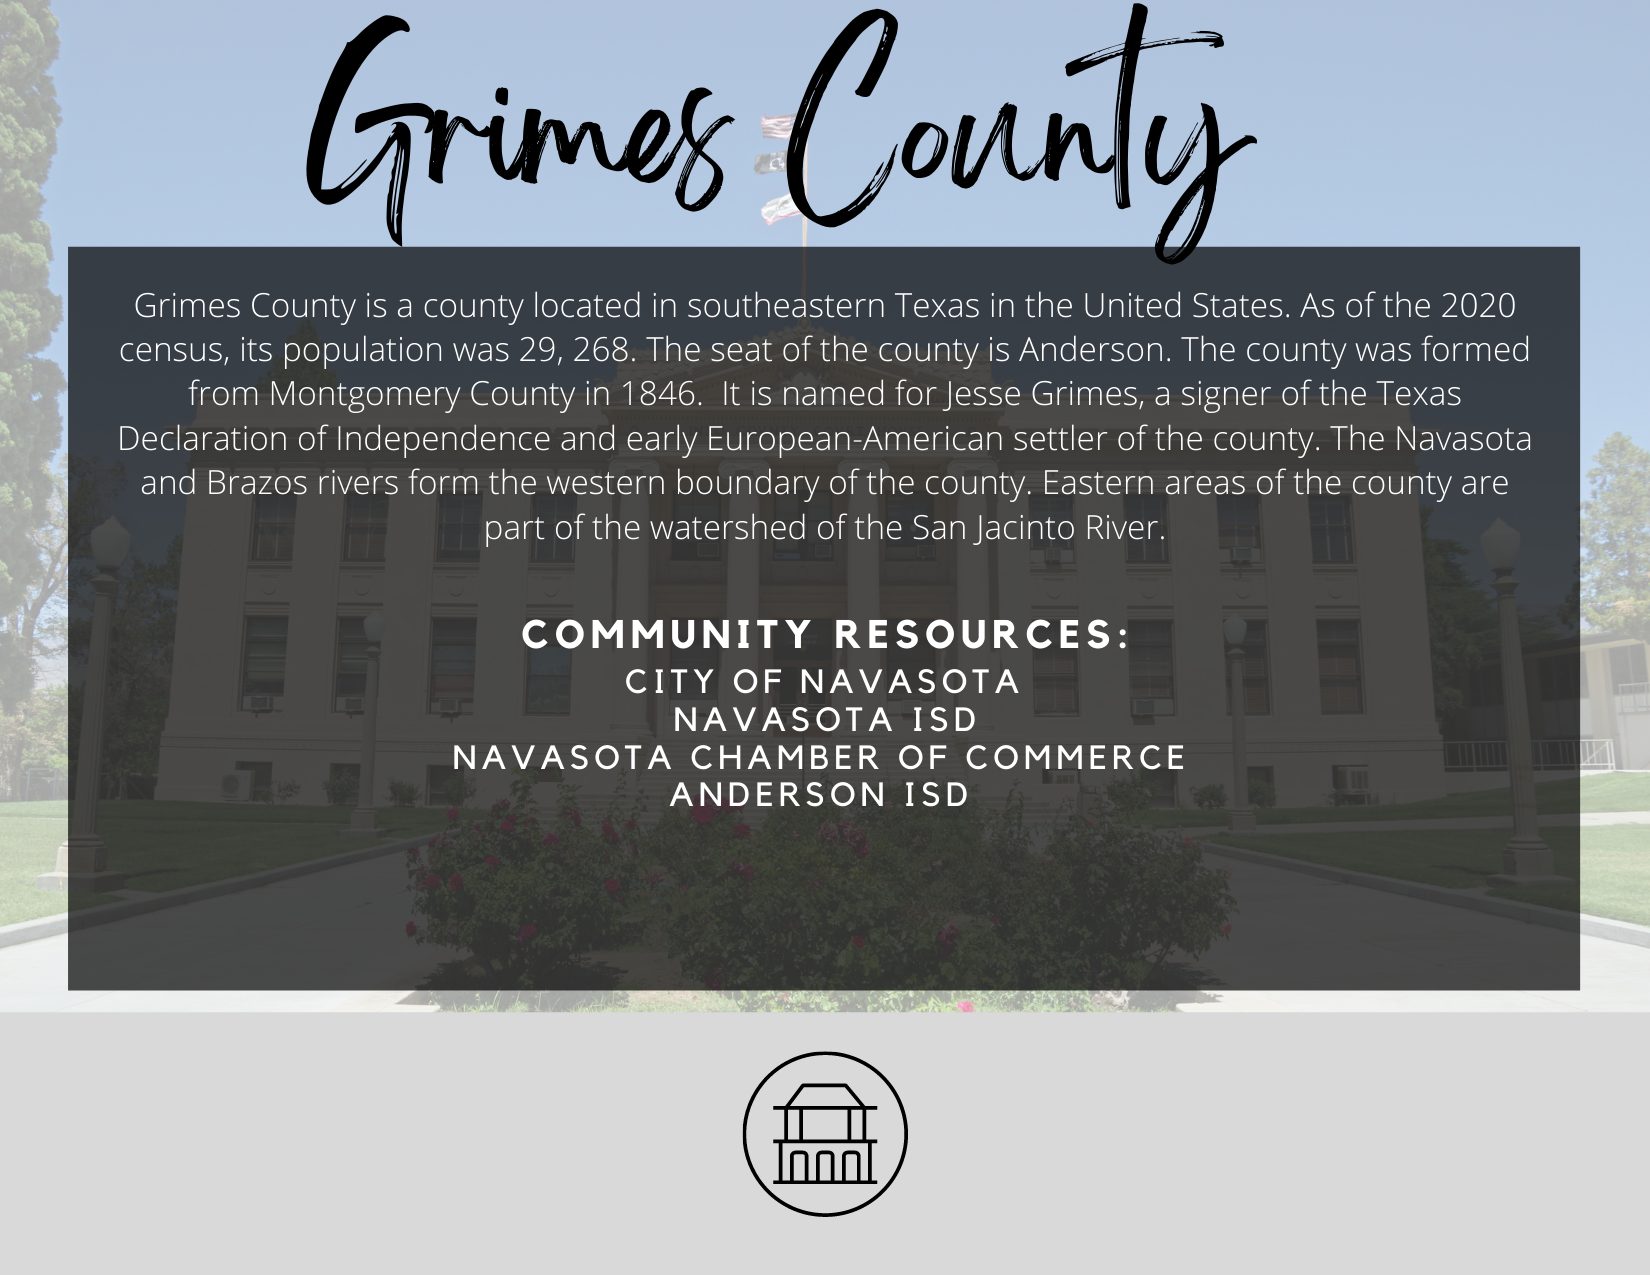 Grimes County